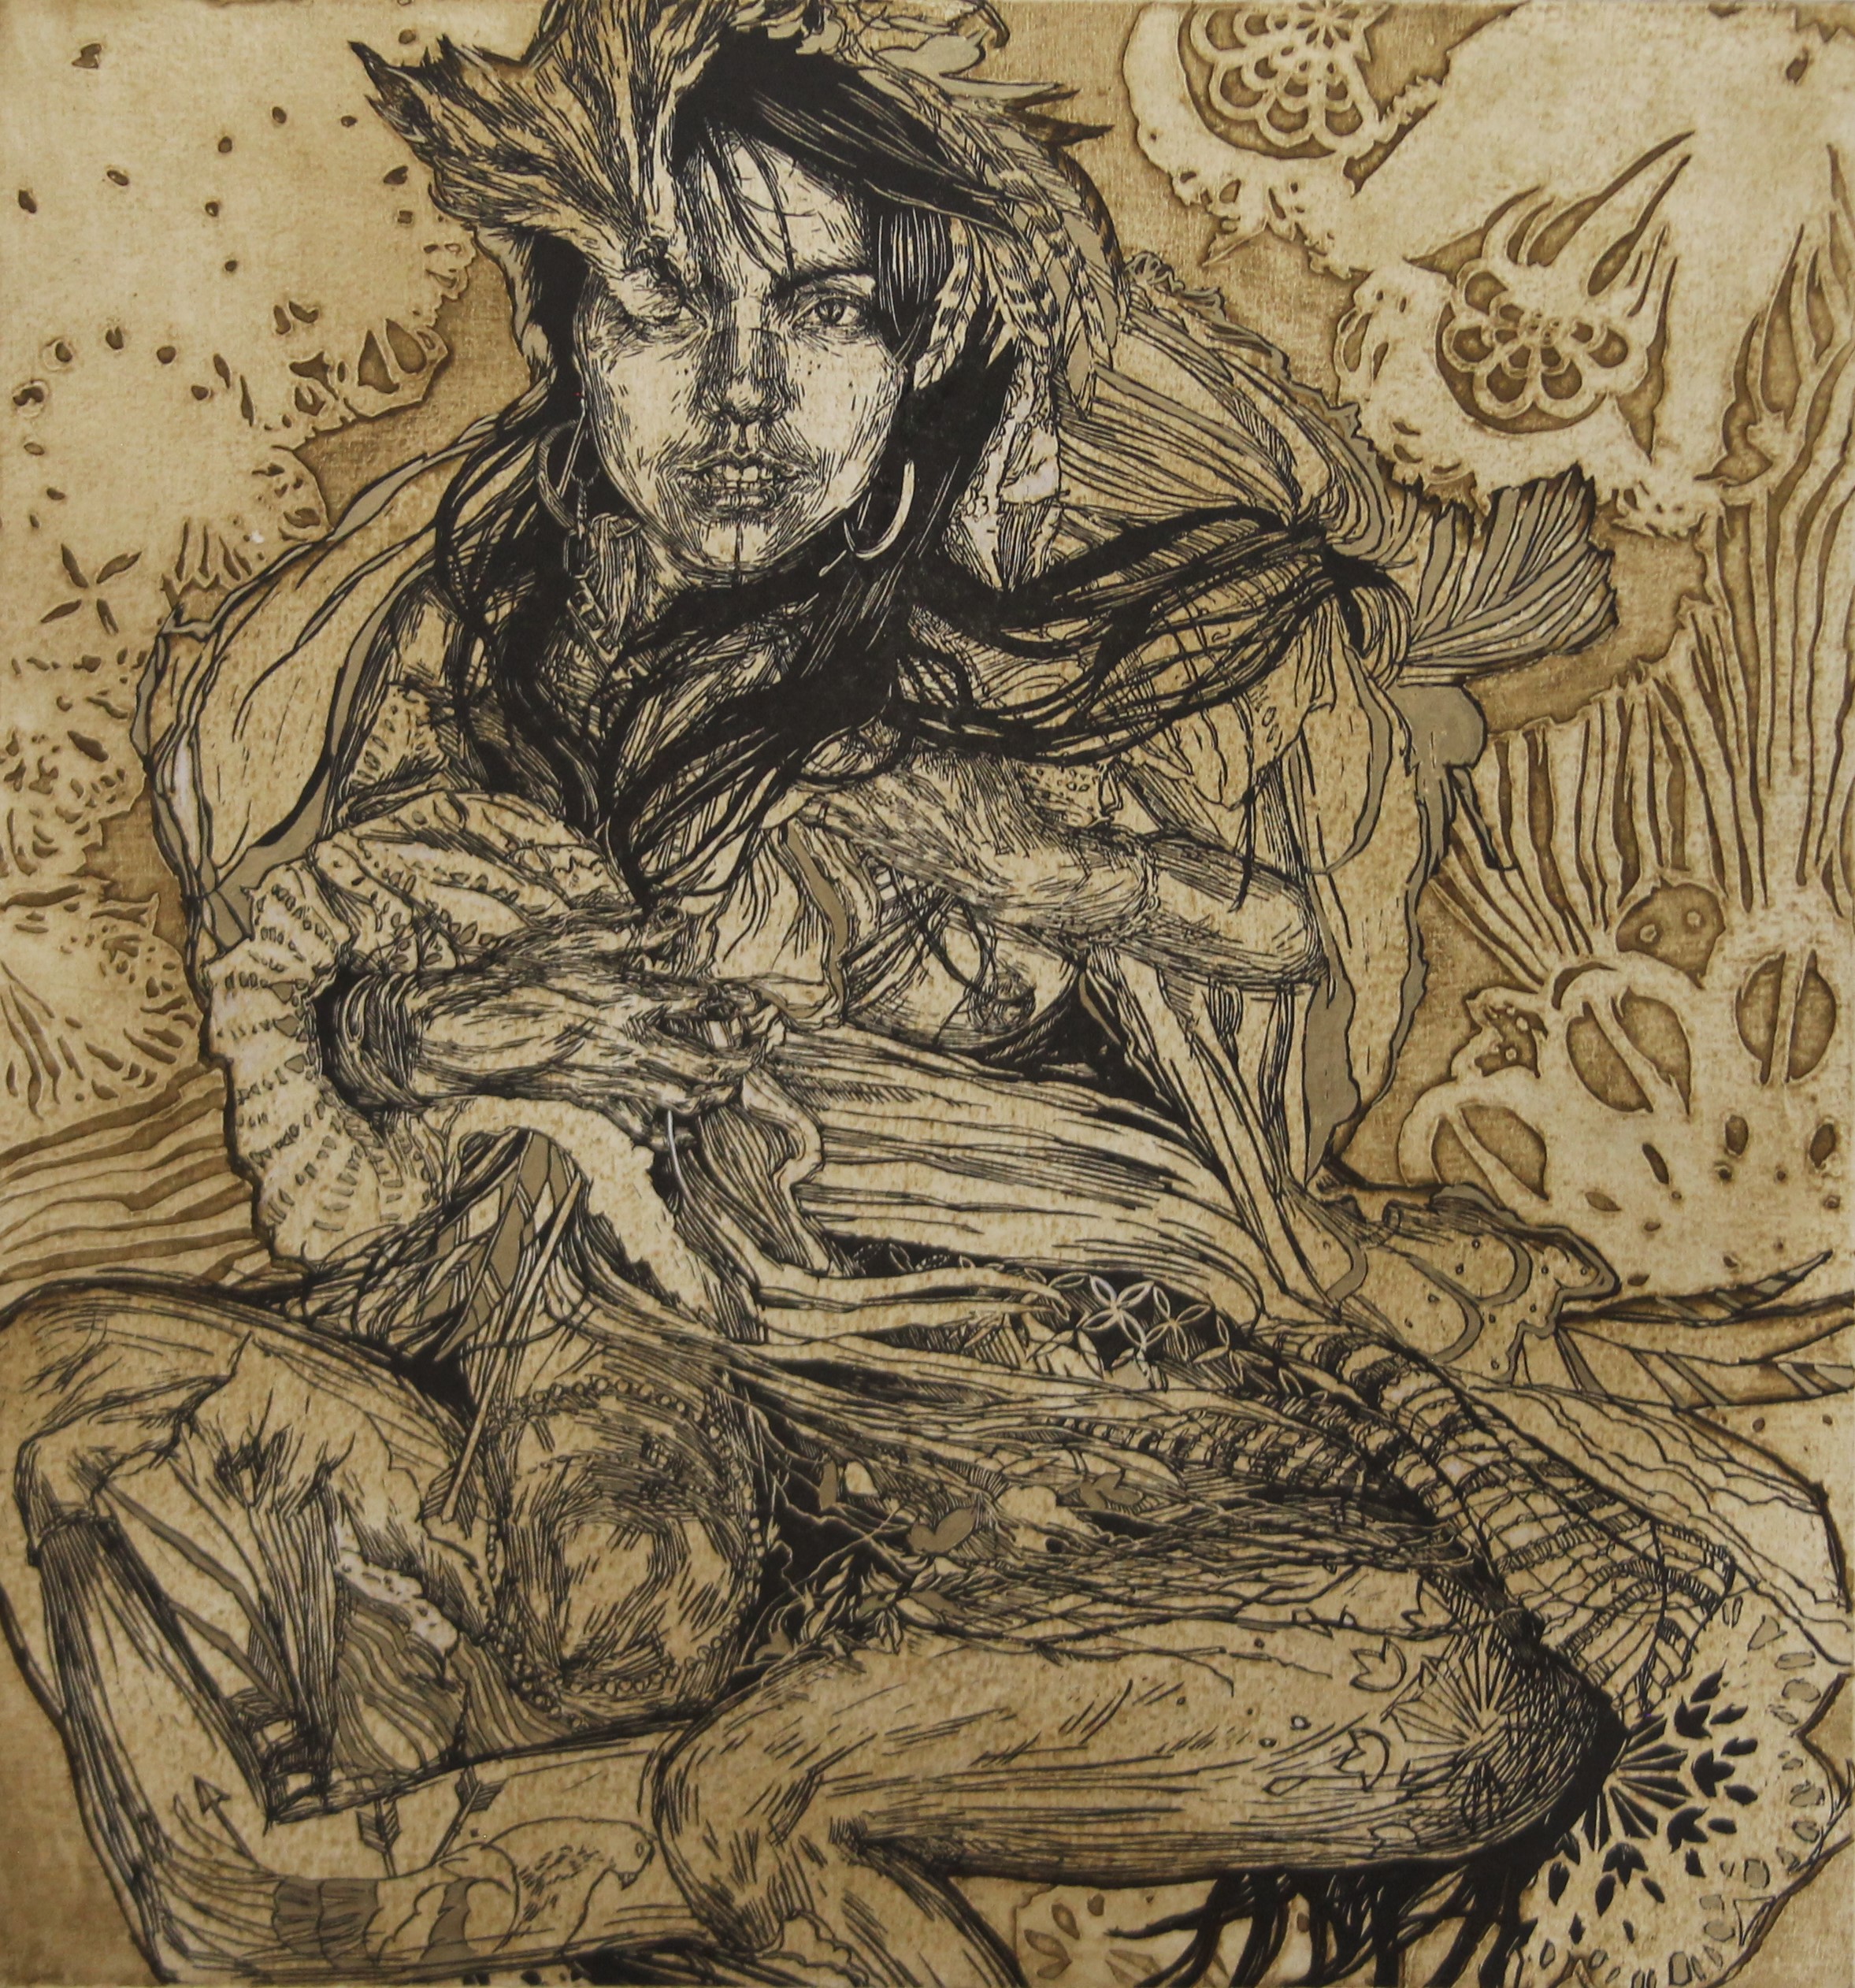 SWOON (AR), Monica, limited edition, signed and numbered 2/2, unframed. 68 x 73.5 cm overall.